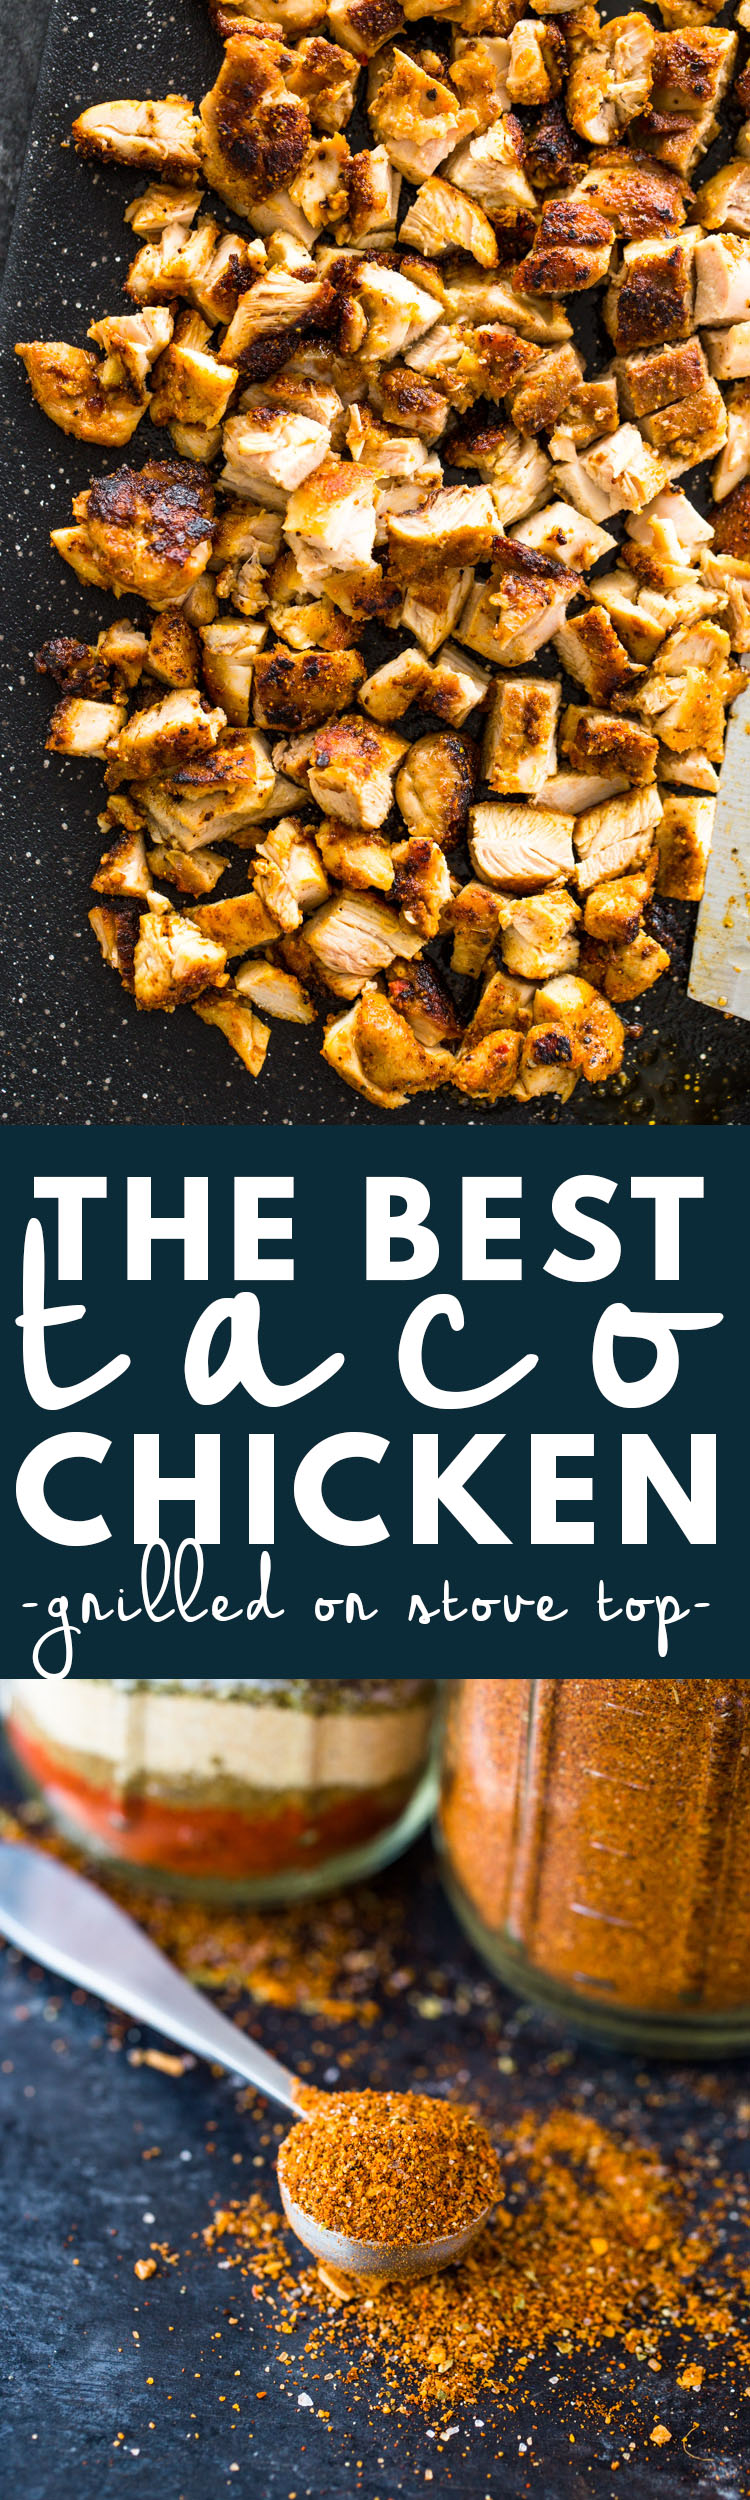 The Best Grilled Chicken ( for Tacos, Burritos, or Salads)